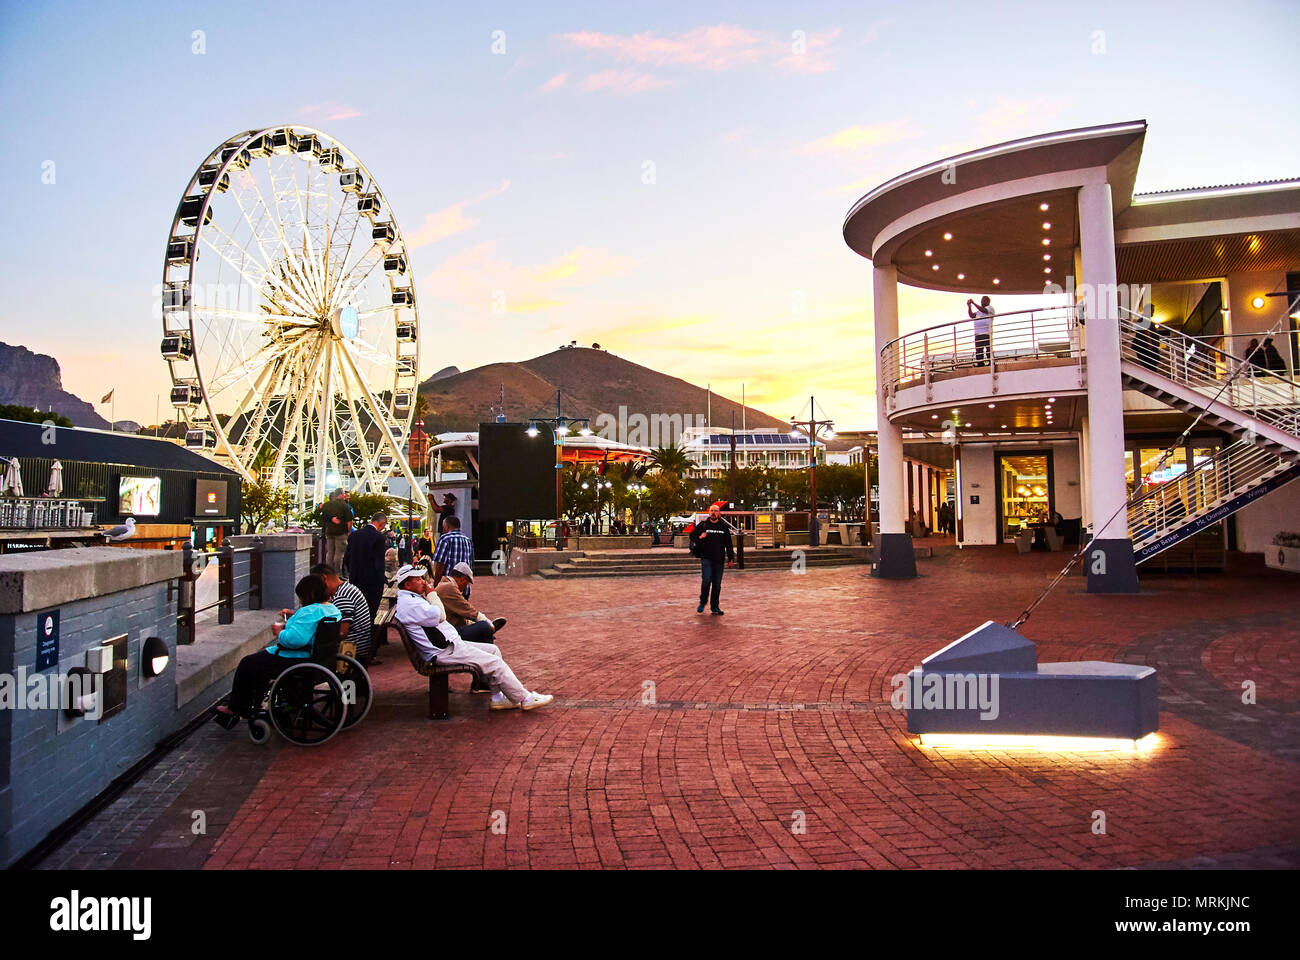 The Victoria & Alfred (V&A) Waterfront in Cape Town is situated on the Atlantic shore, Table Bay Harbour, the City of Cape Town and Table Mountain. Ad Stock Photo